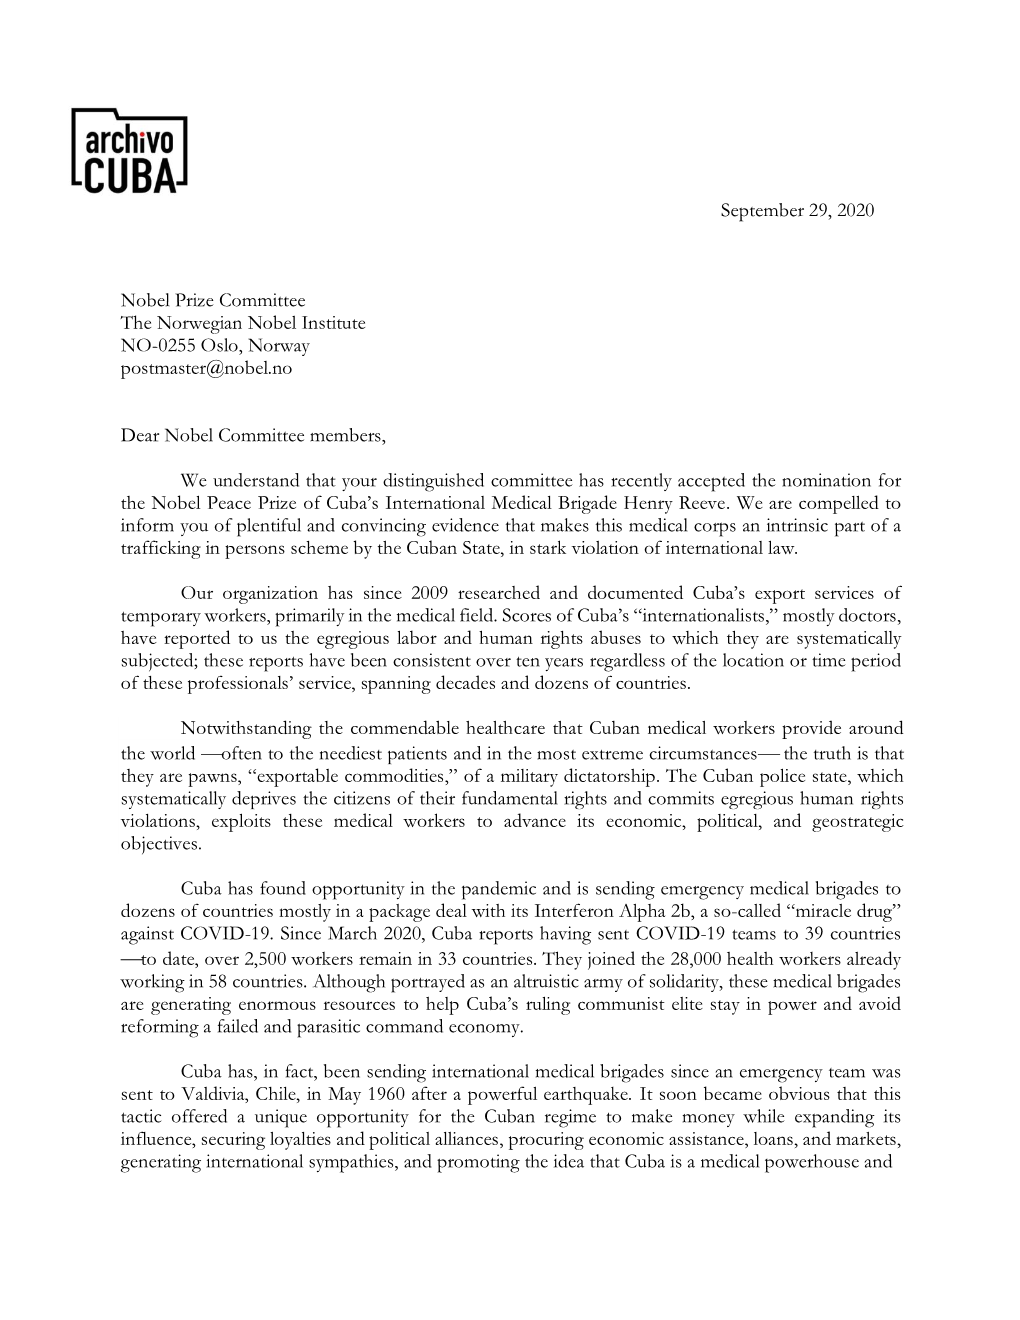 Letter to the Nobel Committee on the Nomination of Cuba's Emergency Medical Brigade